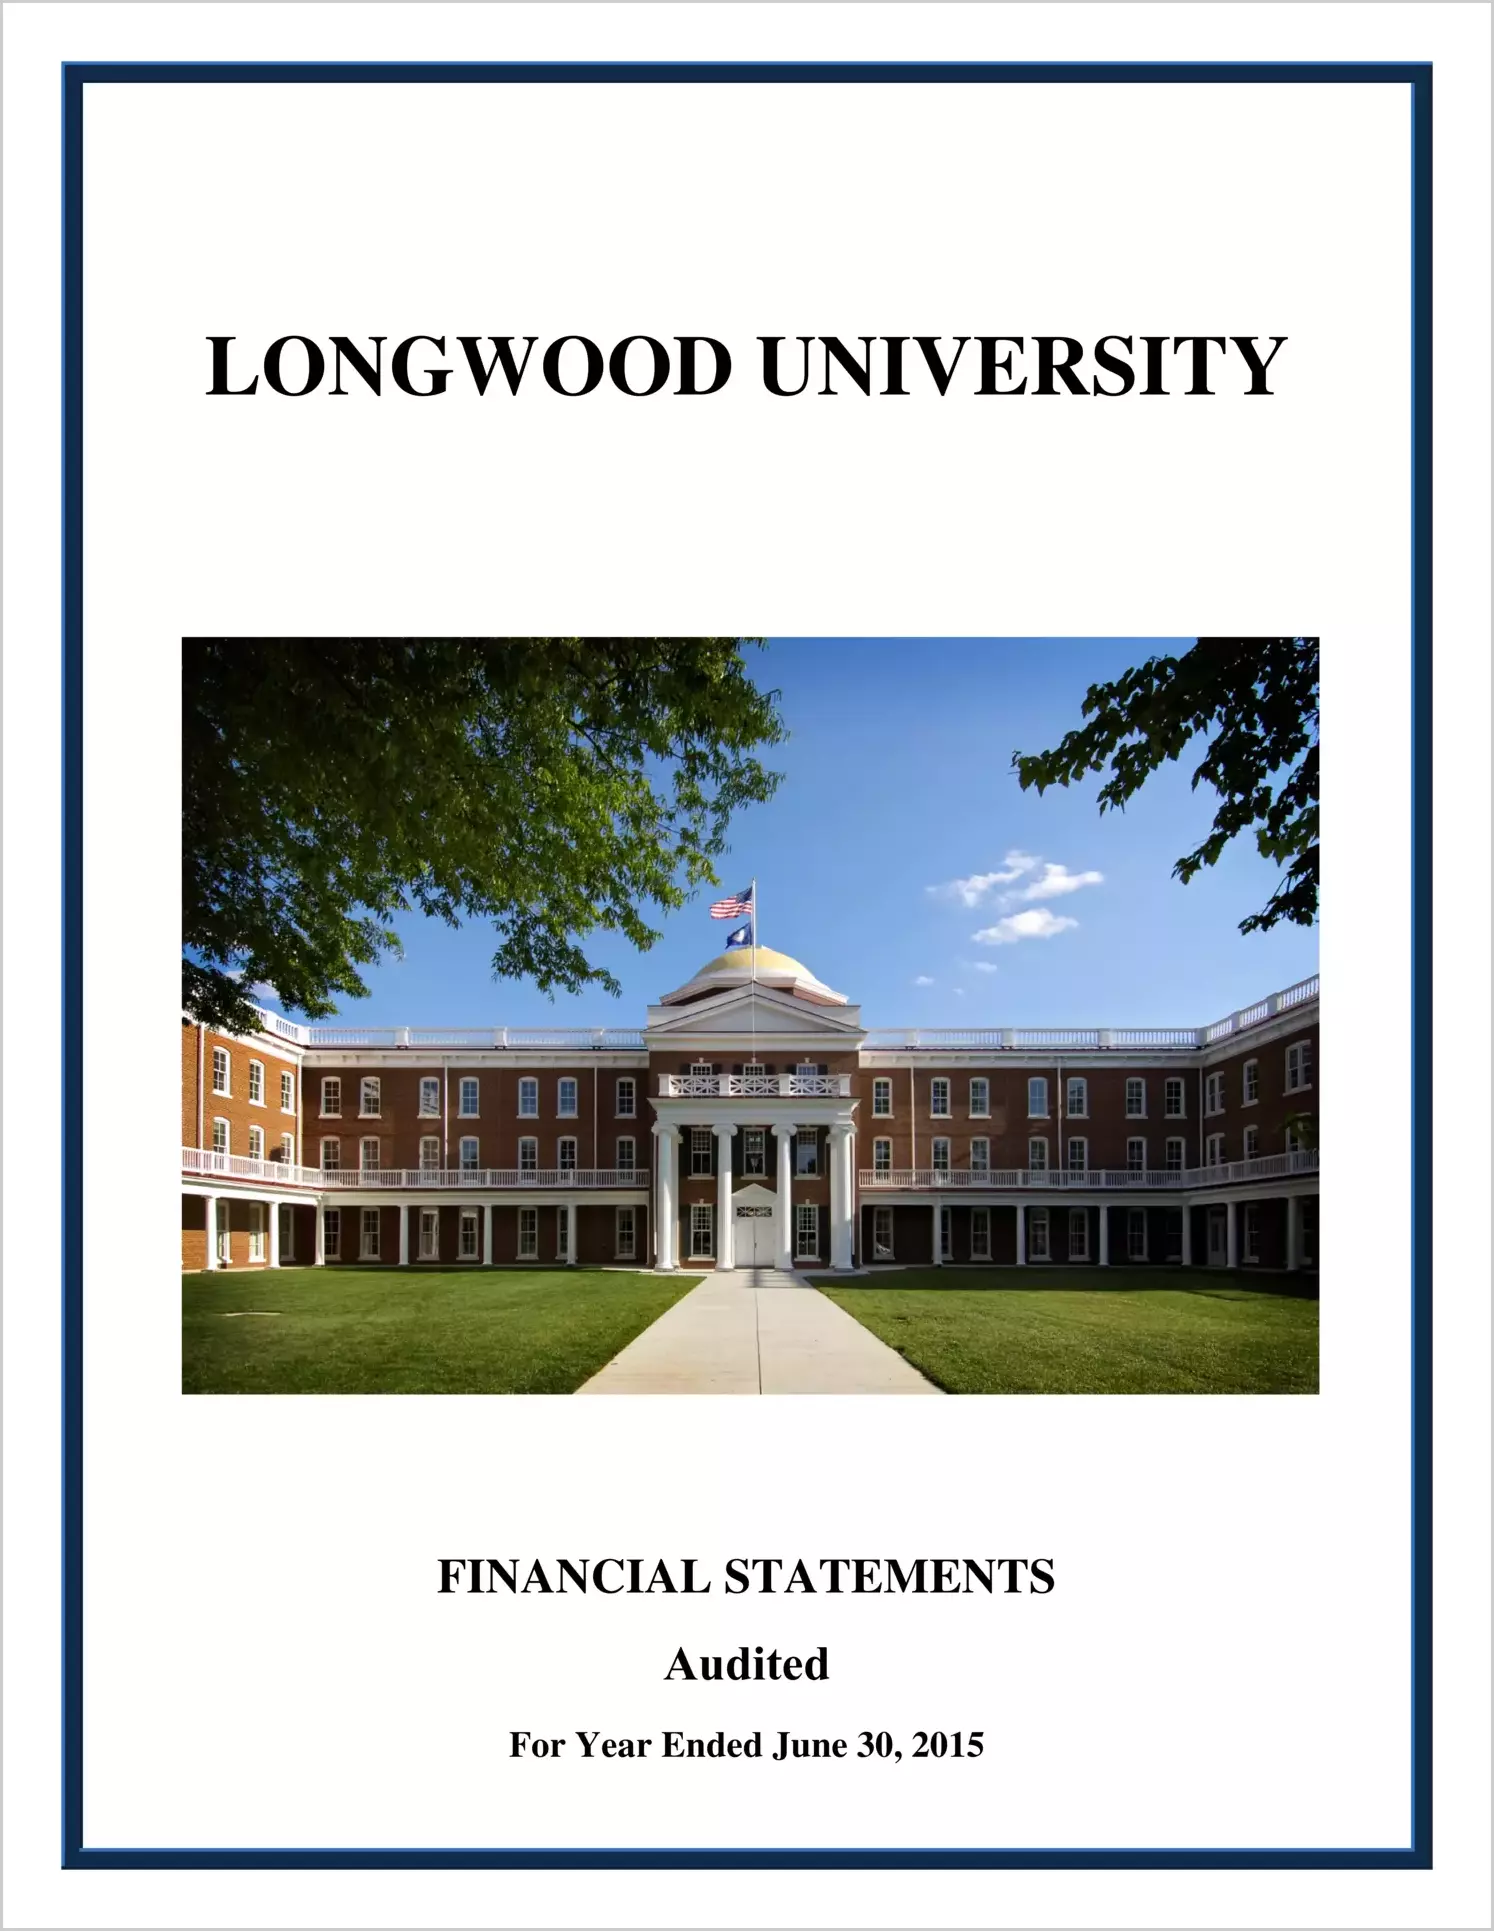 Longwood University Financial Statements for the year ended June 30, 2015